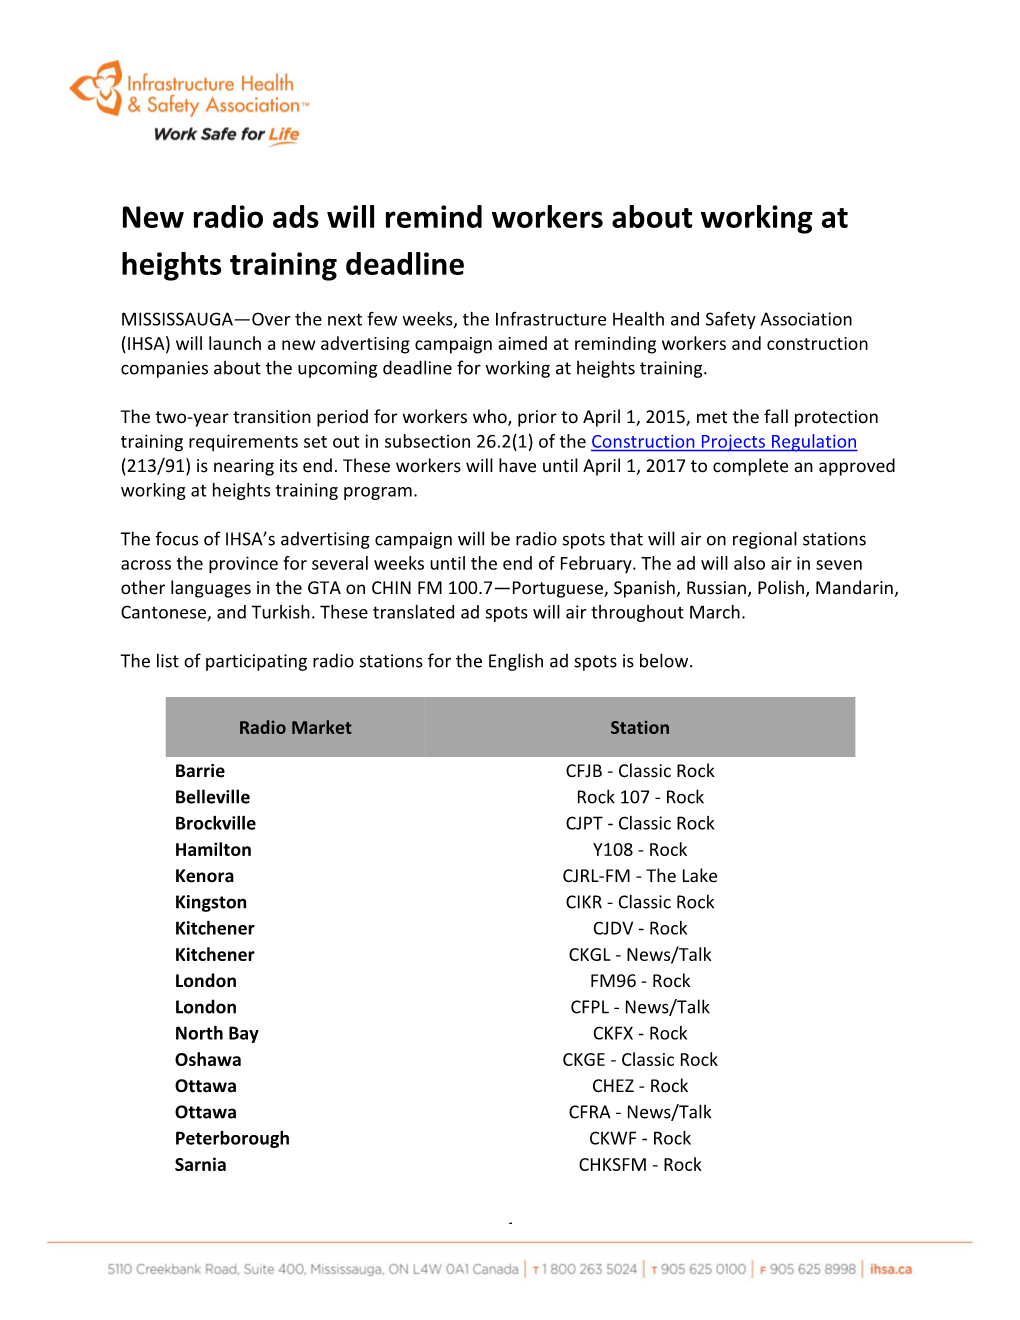 New Radio Ads Will Remind Workers About Working at Heights Training Deadline